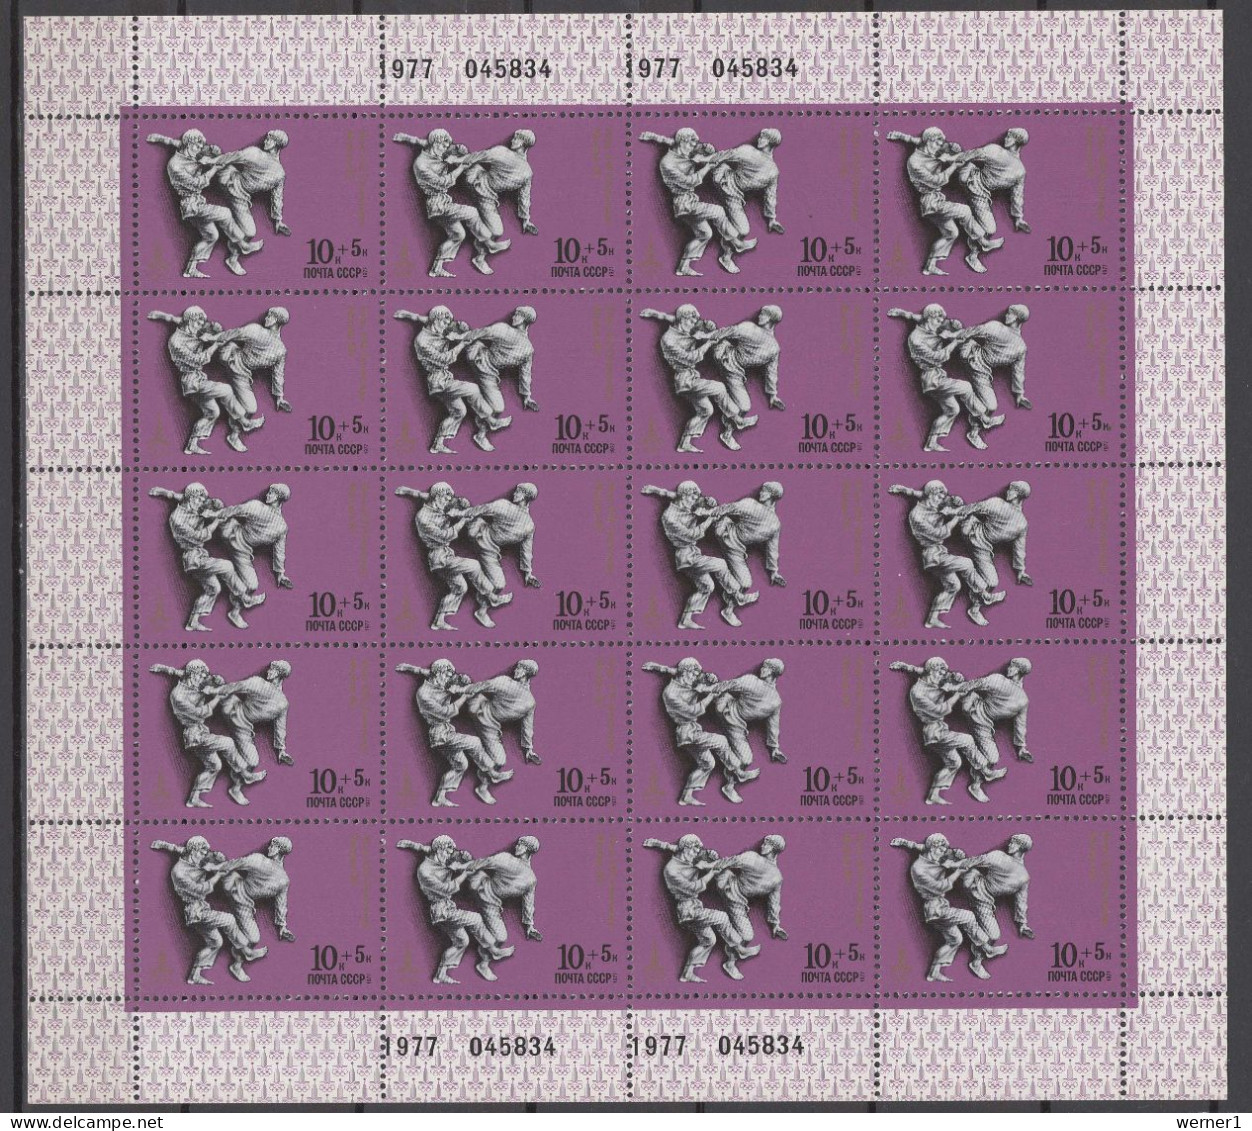 USSR Russia 1977 Olympic Games Moscow, Wrestling, Judo, Boxing, Weightlifting Set Of 5 Sheetlets MNH - Zomer 1980: Moskou